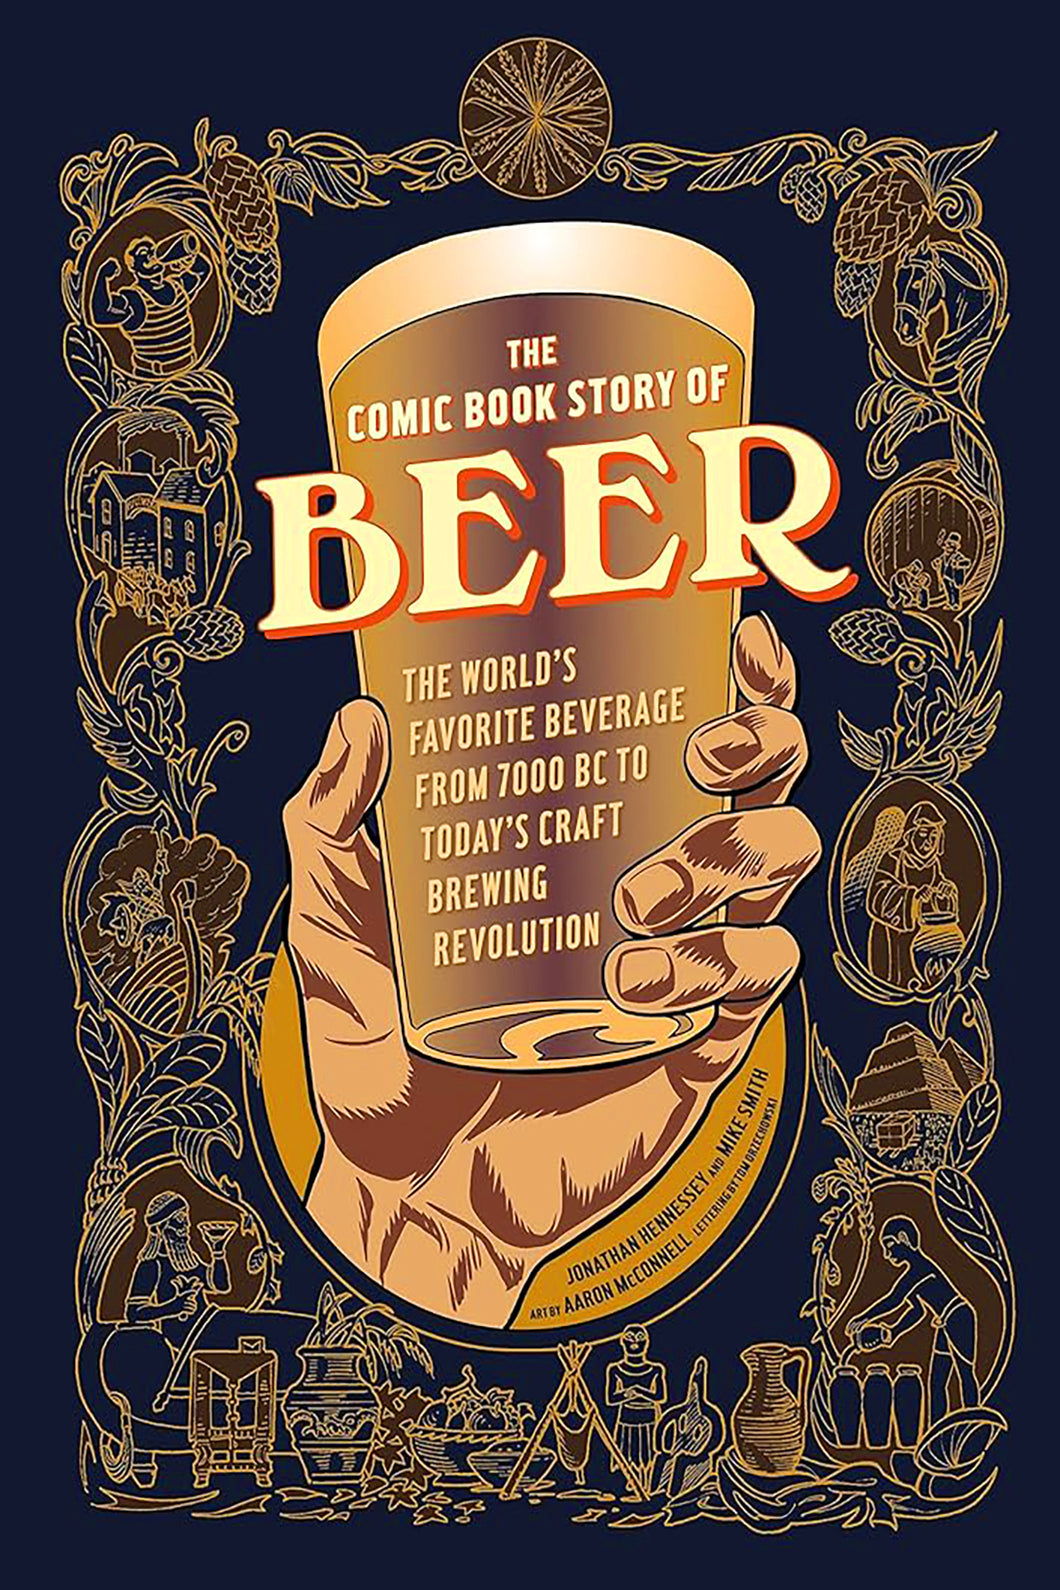 The Comic Book Story of Beer by Jonathan Hennessey and Mike Smith / BOOK OR BUNDLE - Starting at $20